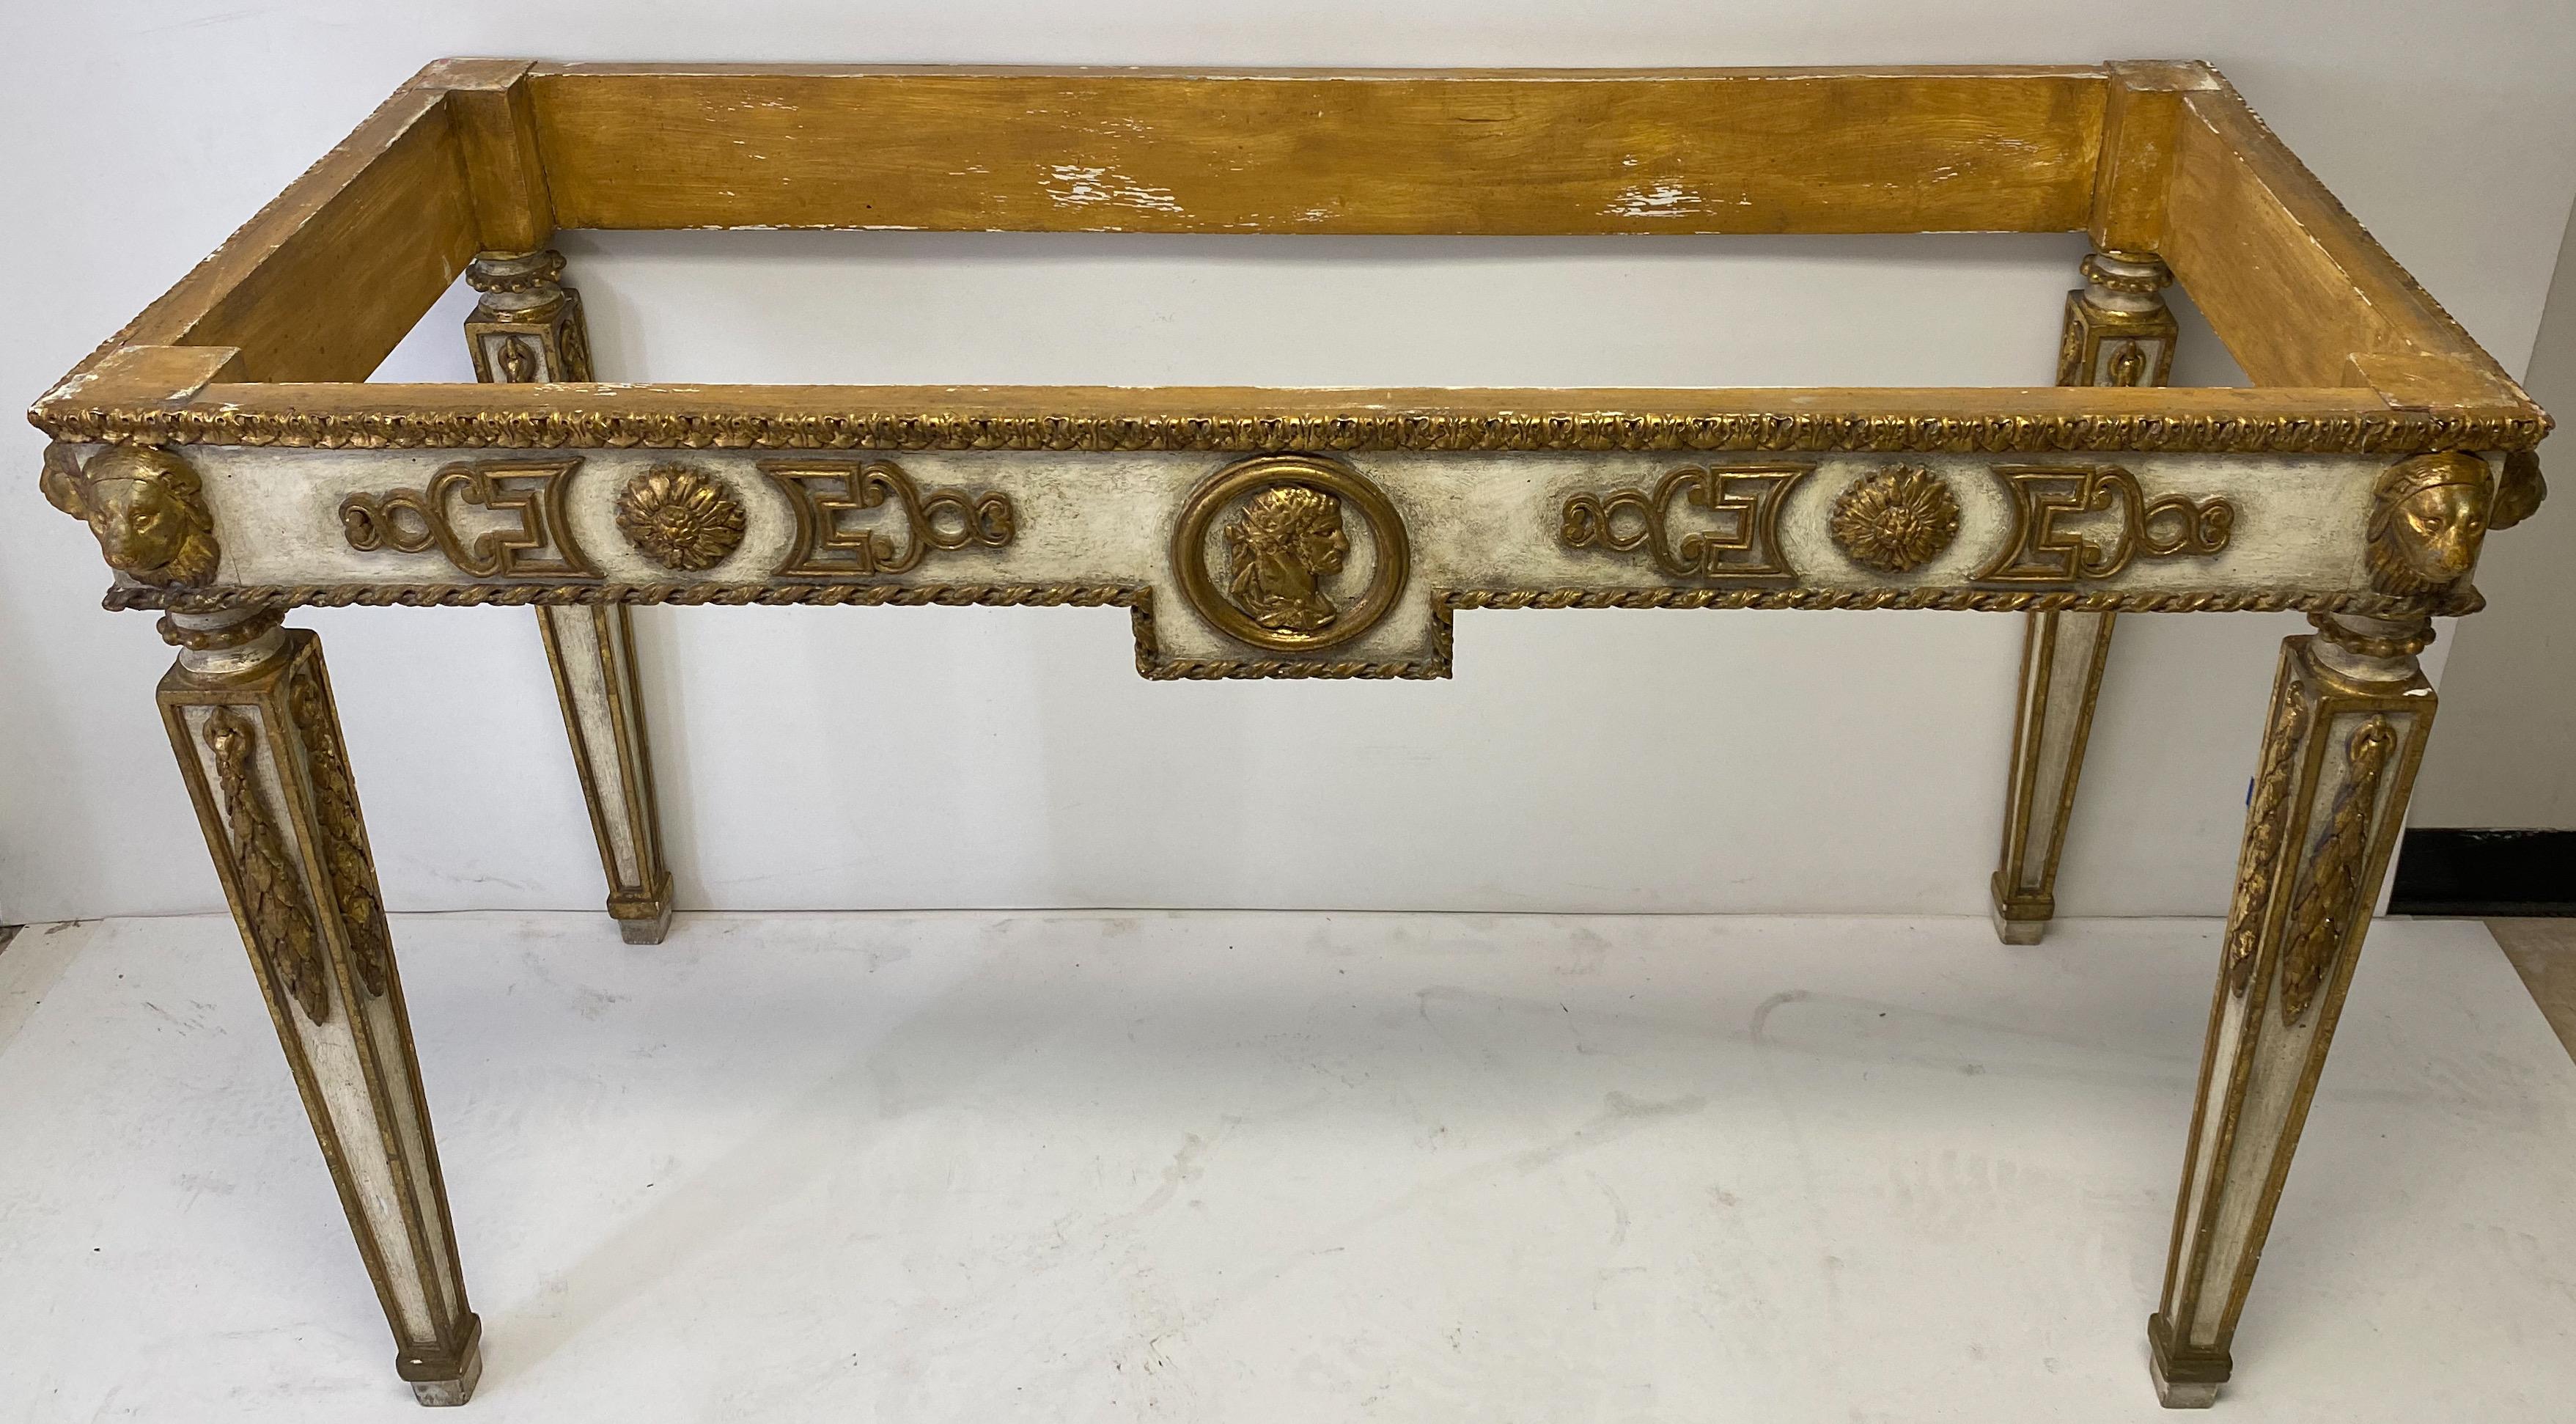 This is a midcentury Italian neoclassical style marble-top console table. The Italian marble is not attached and does appear to be original. The heavily carved frame is painted with an ivory base and gilt accents. It is unmarked.